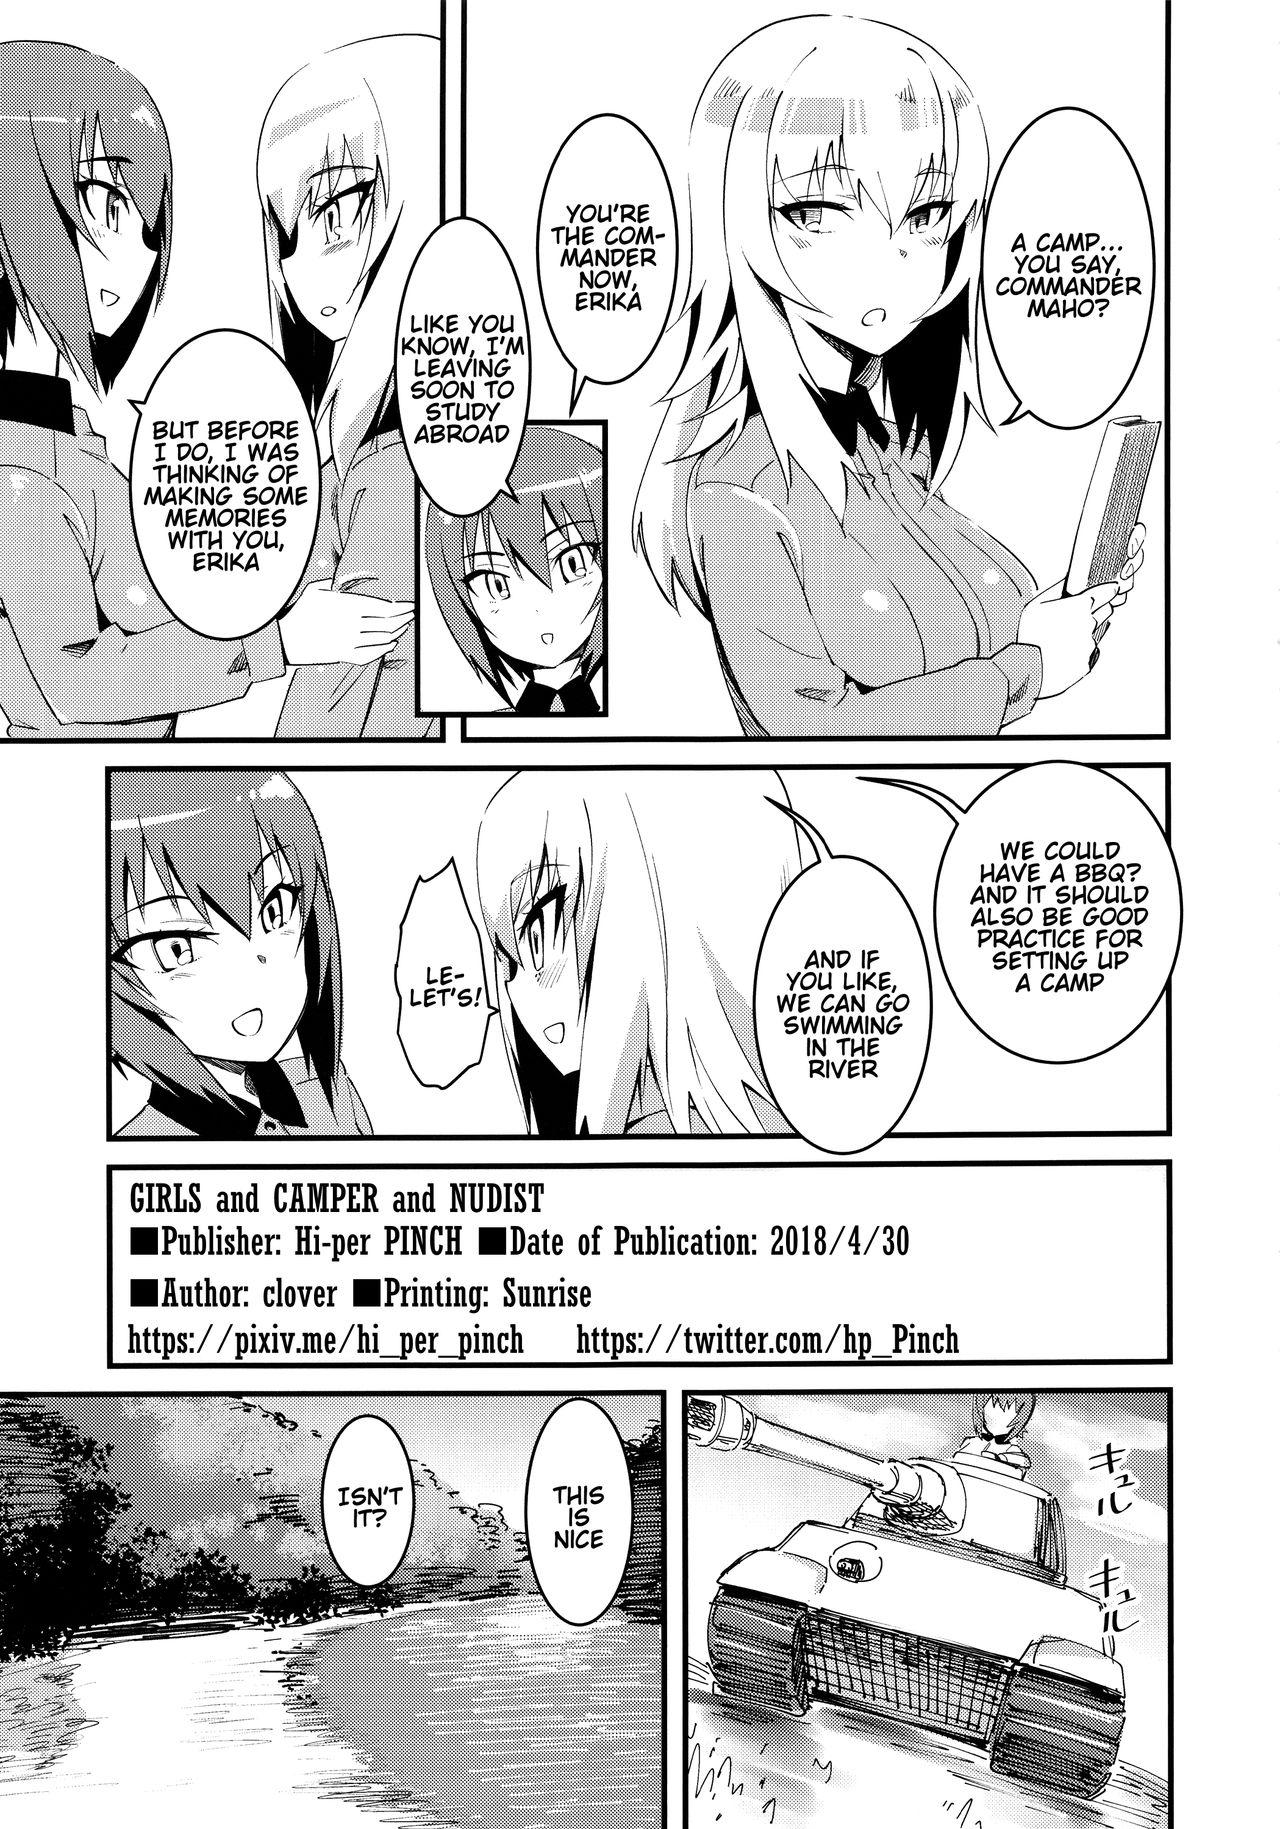 Food GIRLS and CAMPER and NUDIST - Girls und panzer Toying - Page 2